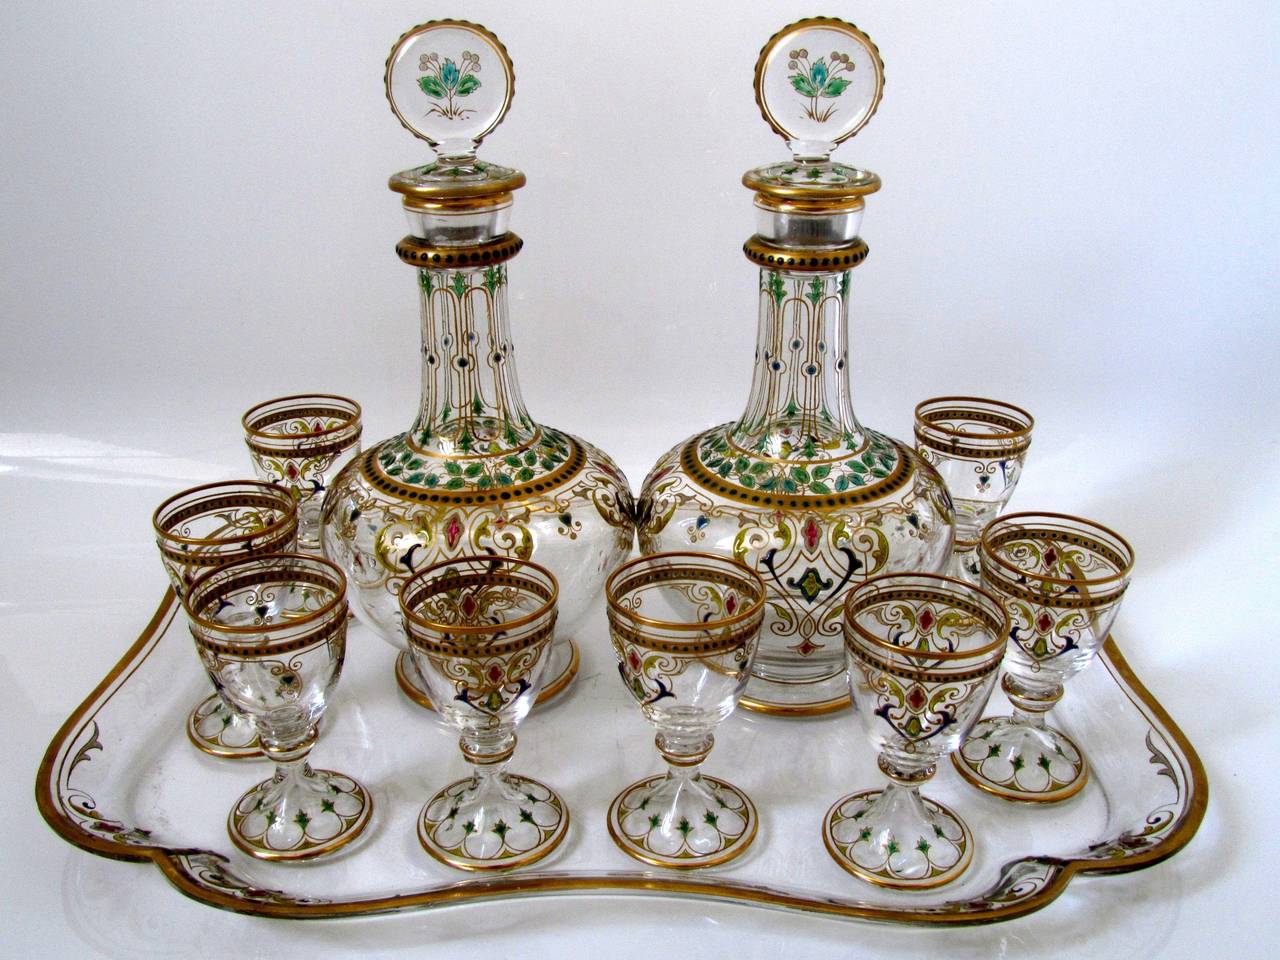 1870s Exceptional French Baccarat Enameled Crystal Liquor Service 5